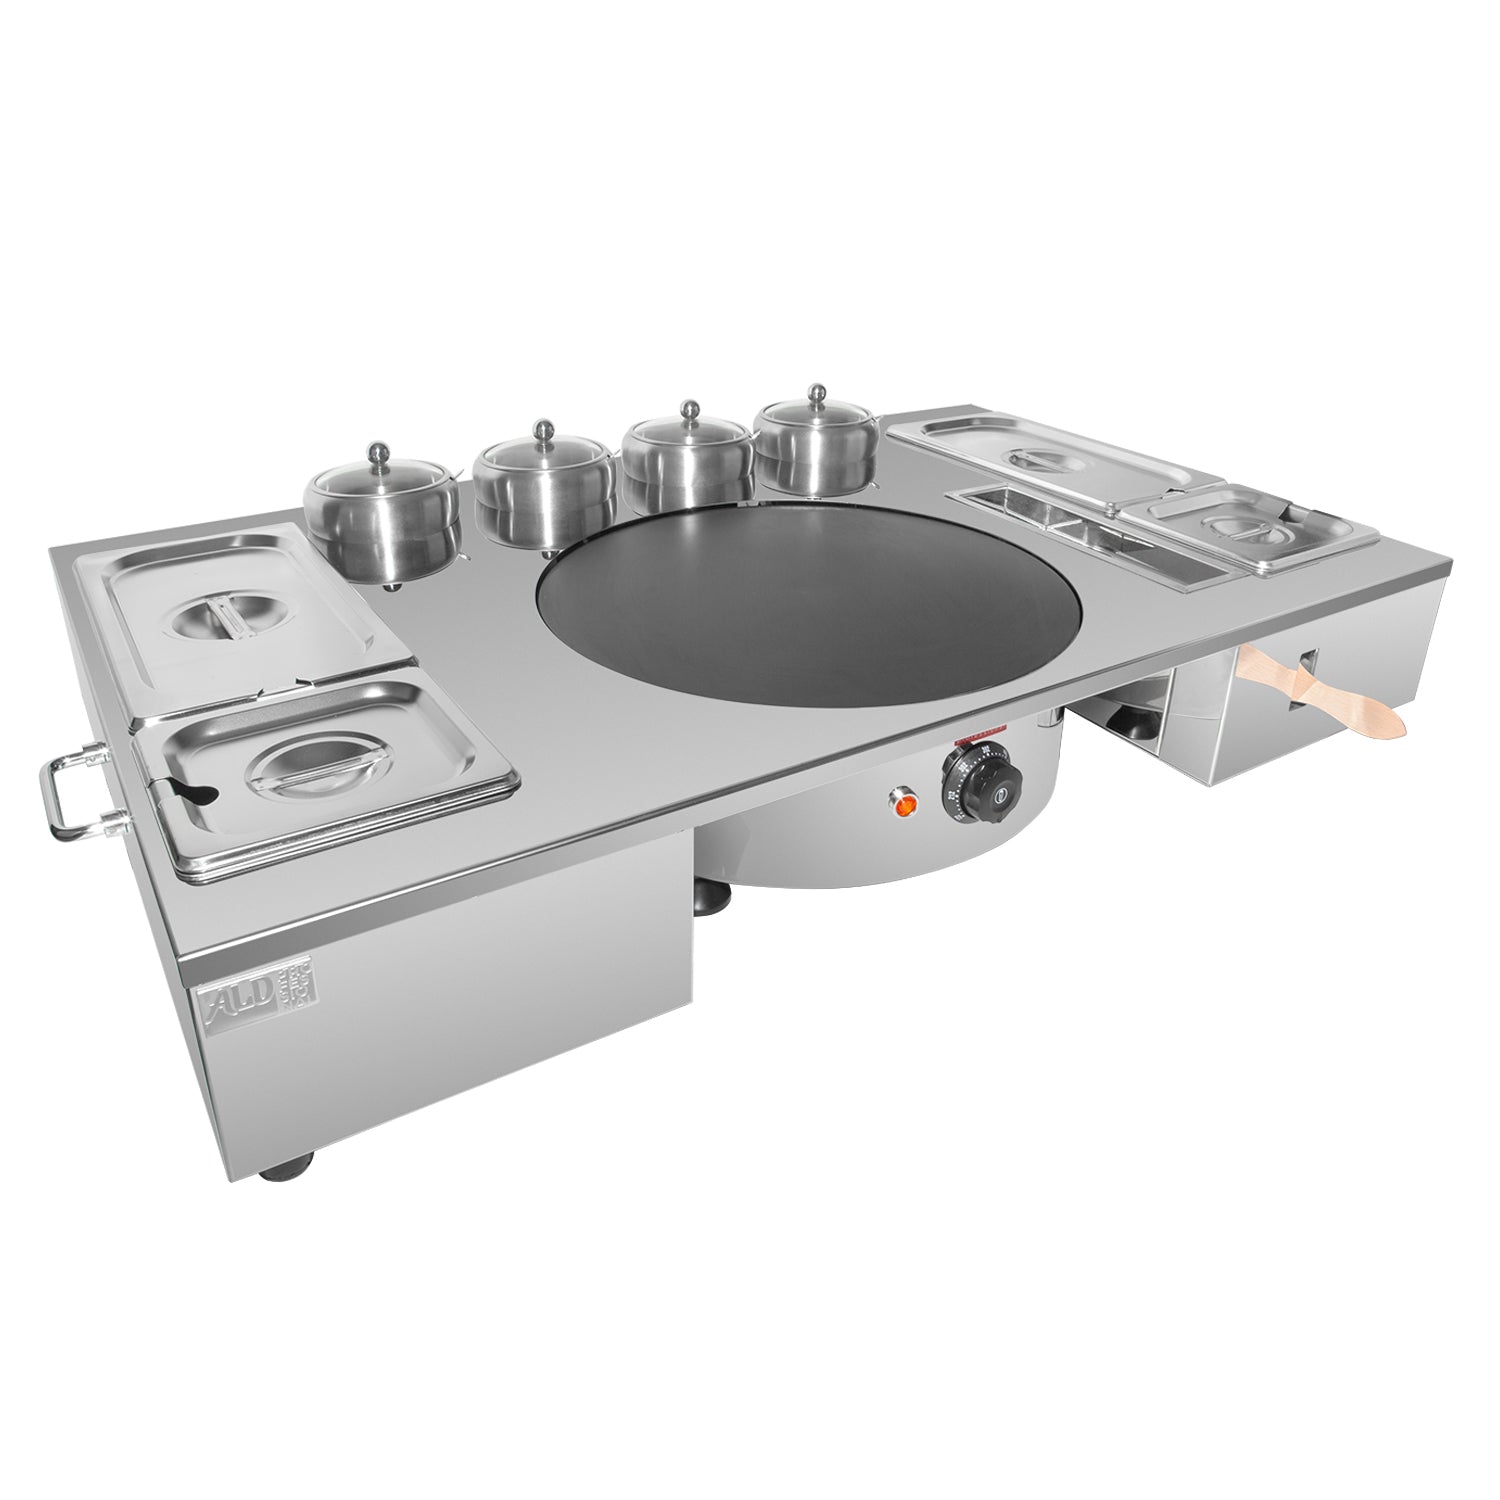 ALDKitchen Crepe Maker with Service Station | Nonstick Plate | 8 Pots and Tools Included